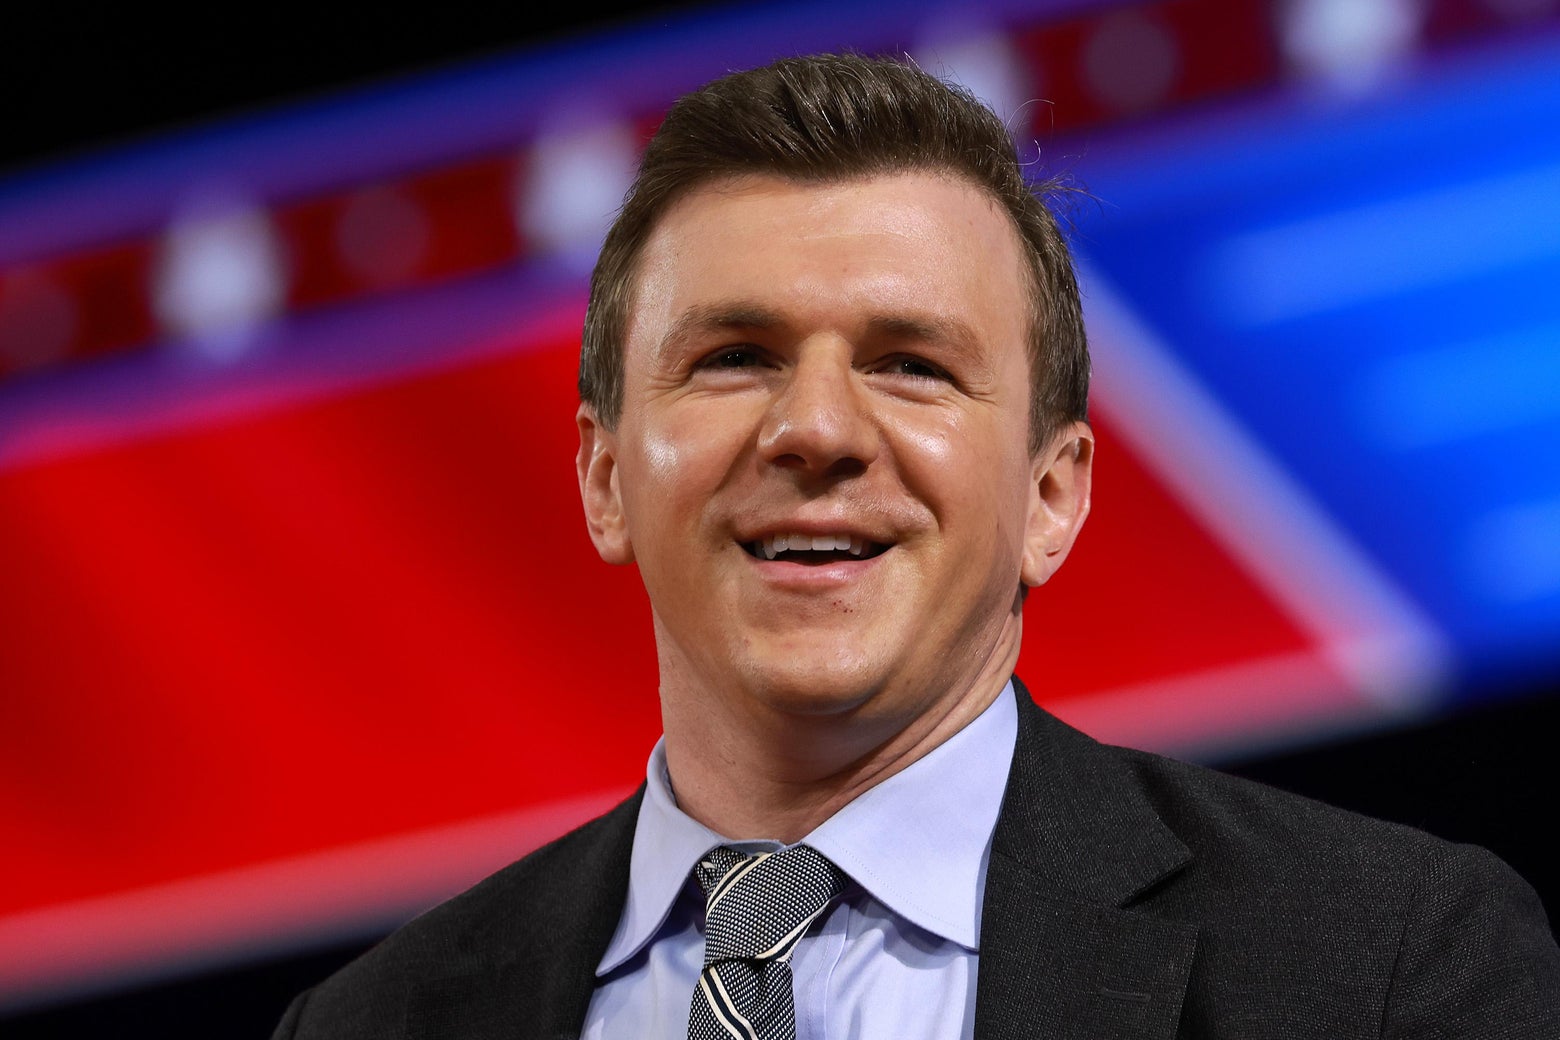 The Right Has Found a New Narrative to Explain Project Veritas’ Implosion